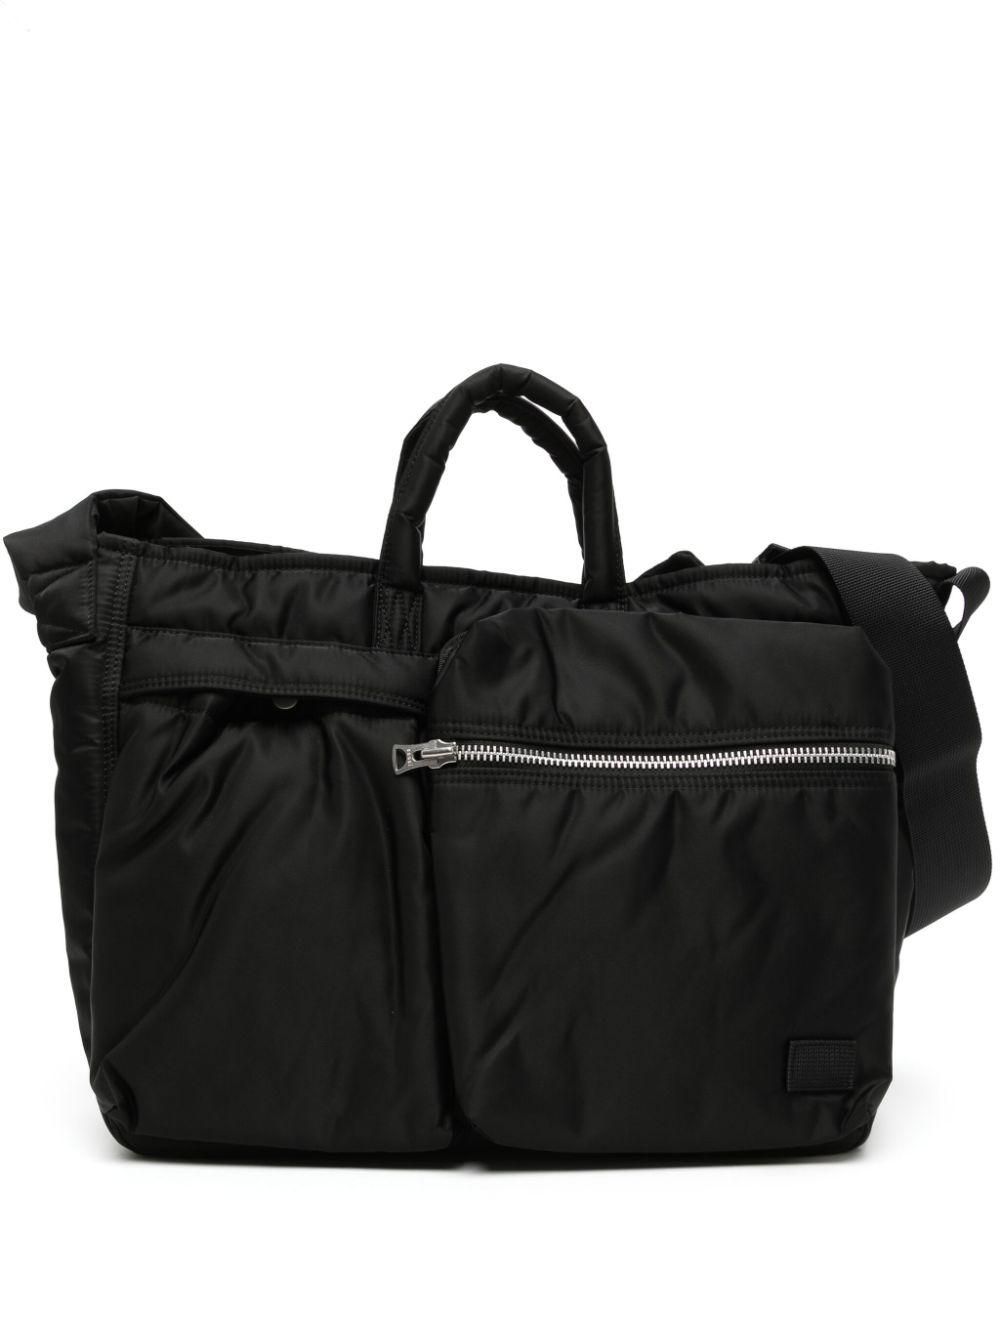 Sacai Padded Oversized Tote Bag in Black for Men | Lyst